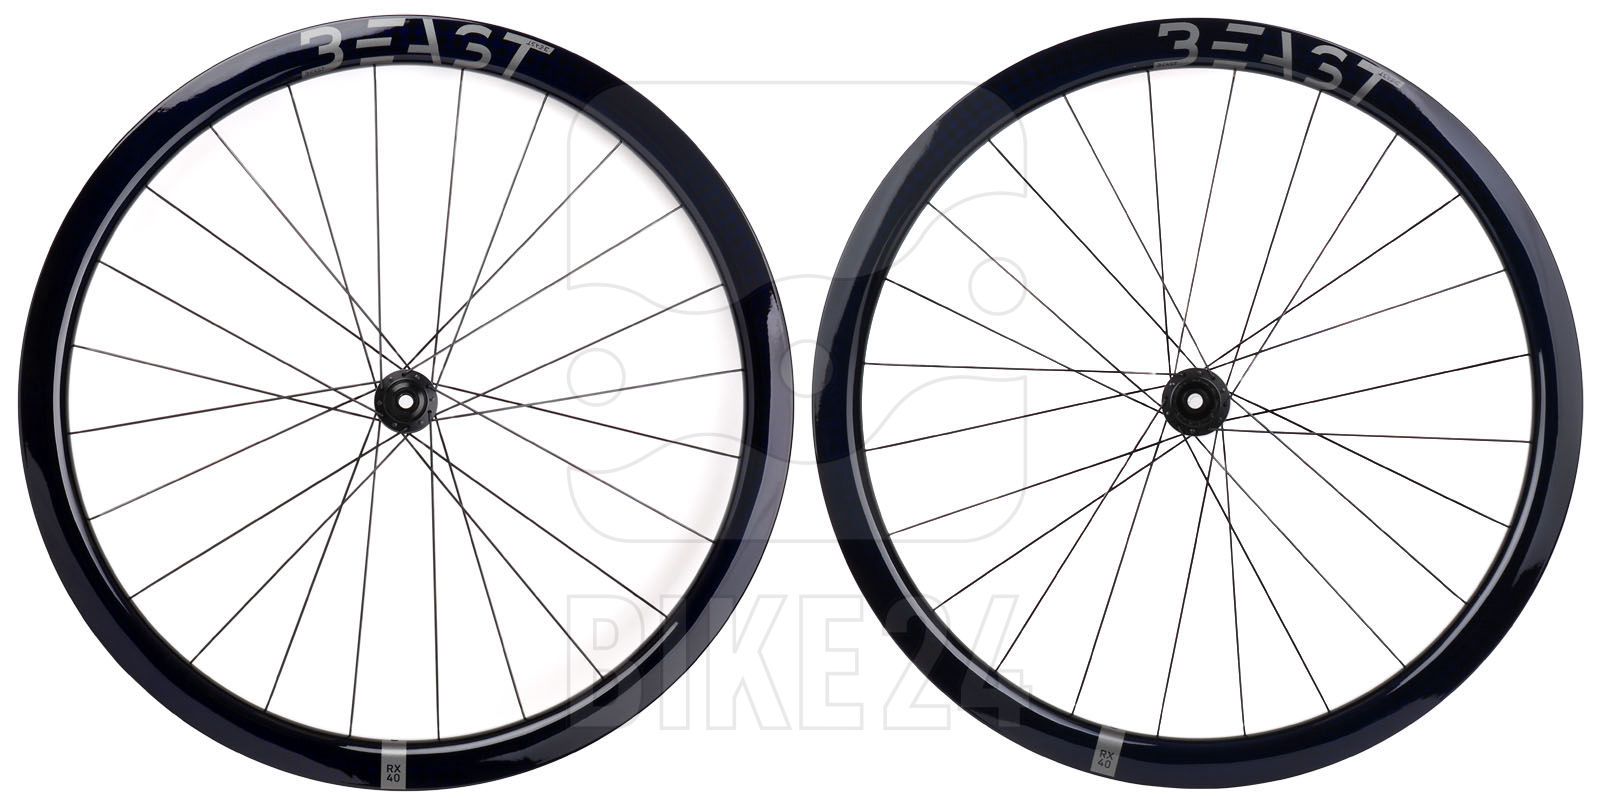 Image of Beast Components RX40 + DT Swiss 240 Carbon Wheelset - Center Lock - FW: 12x100mm | RW: 12x142mm - SQUARE blue